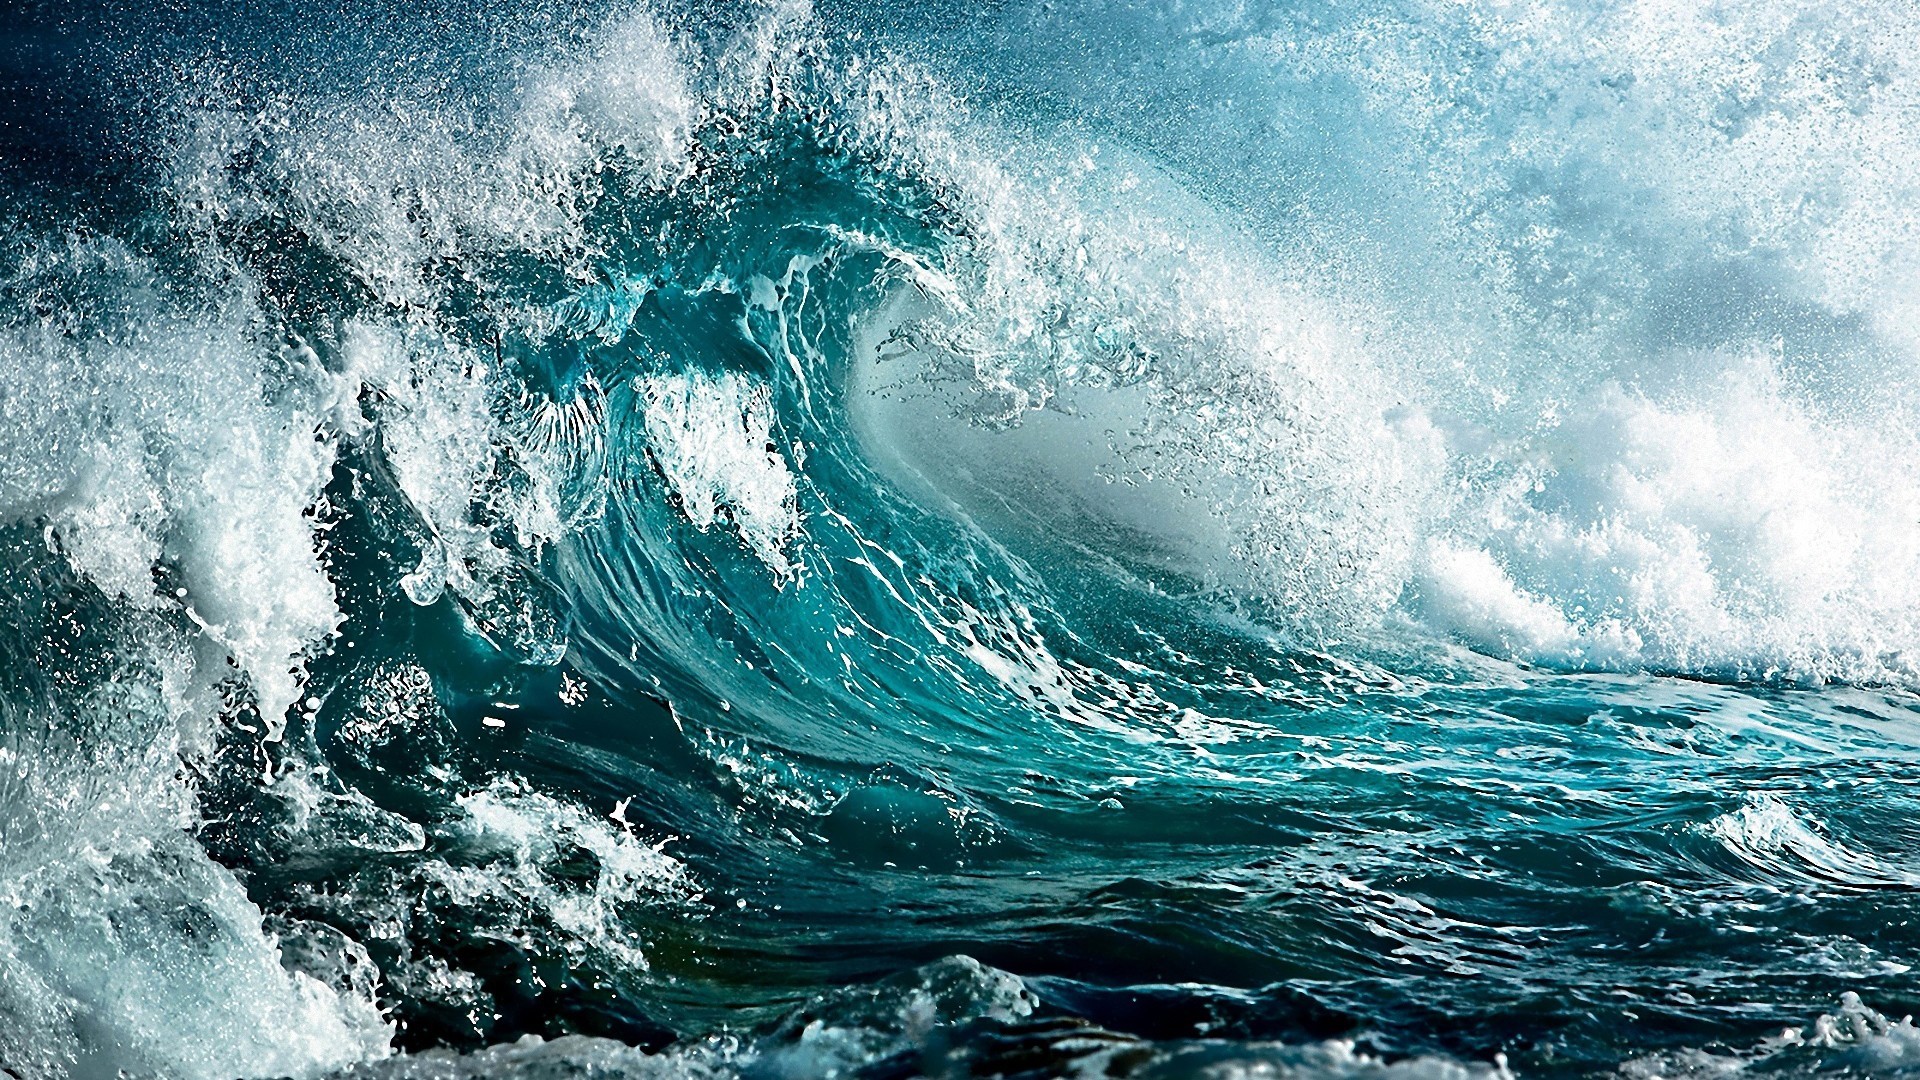 General 1920x1080 waves sea nature